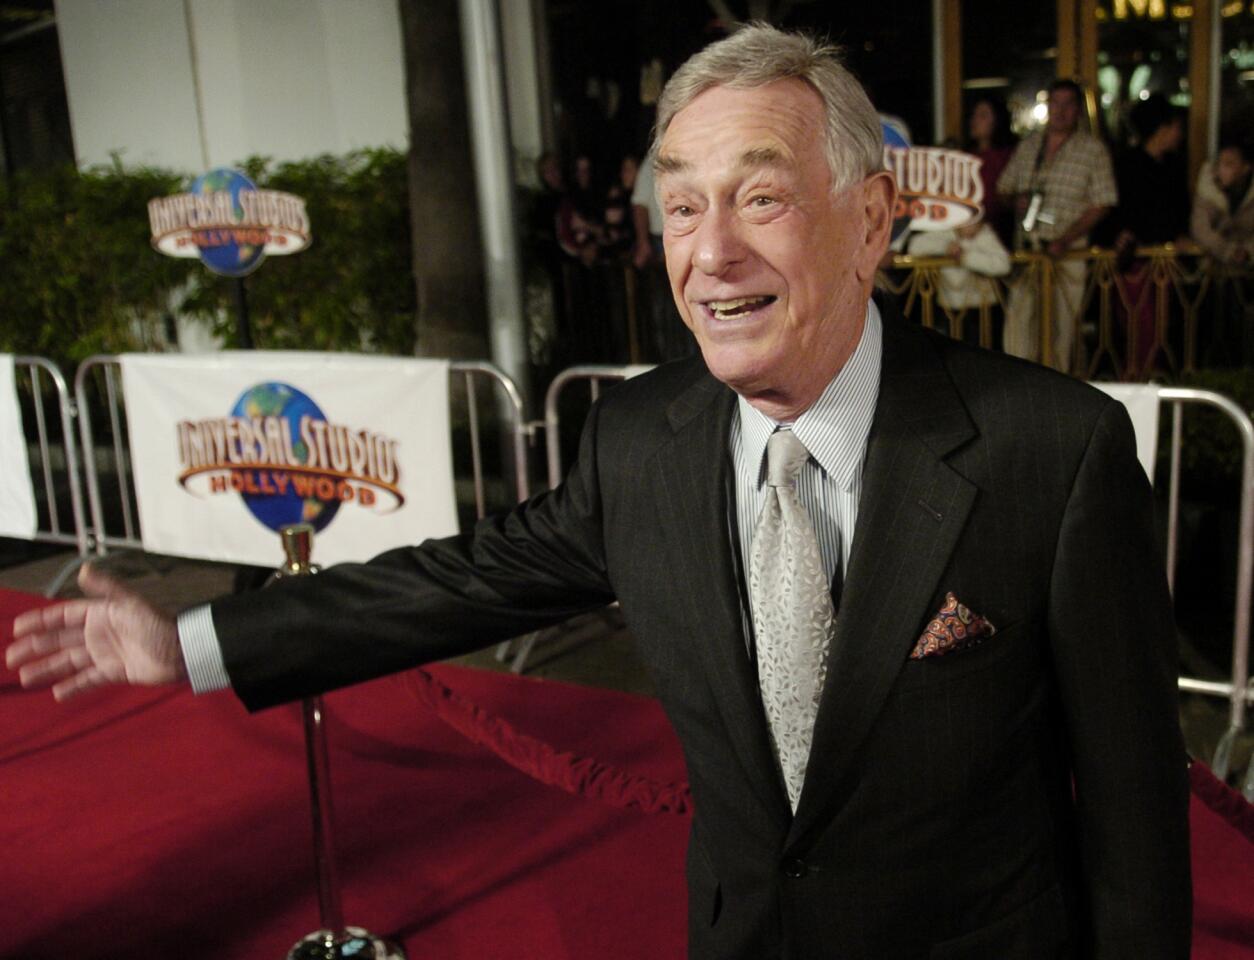 Shelley Berman, whose groundbreaking comedy routines in the 1950s and 1960s addressed the annoyances of everyday life, died Sept. 1, 2017. He was 92. Read more.